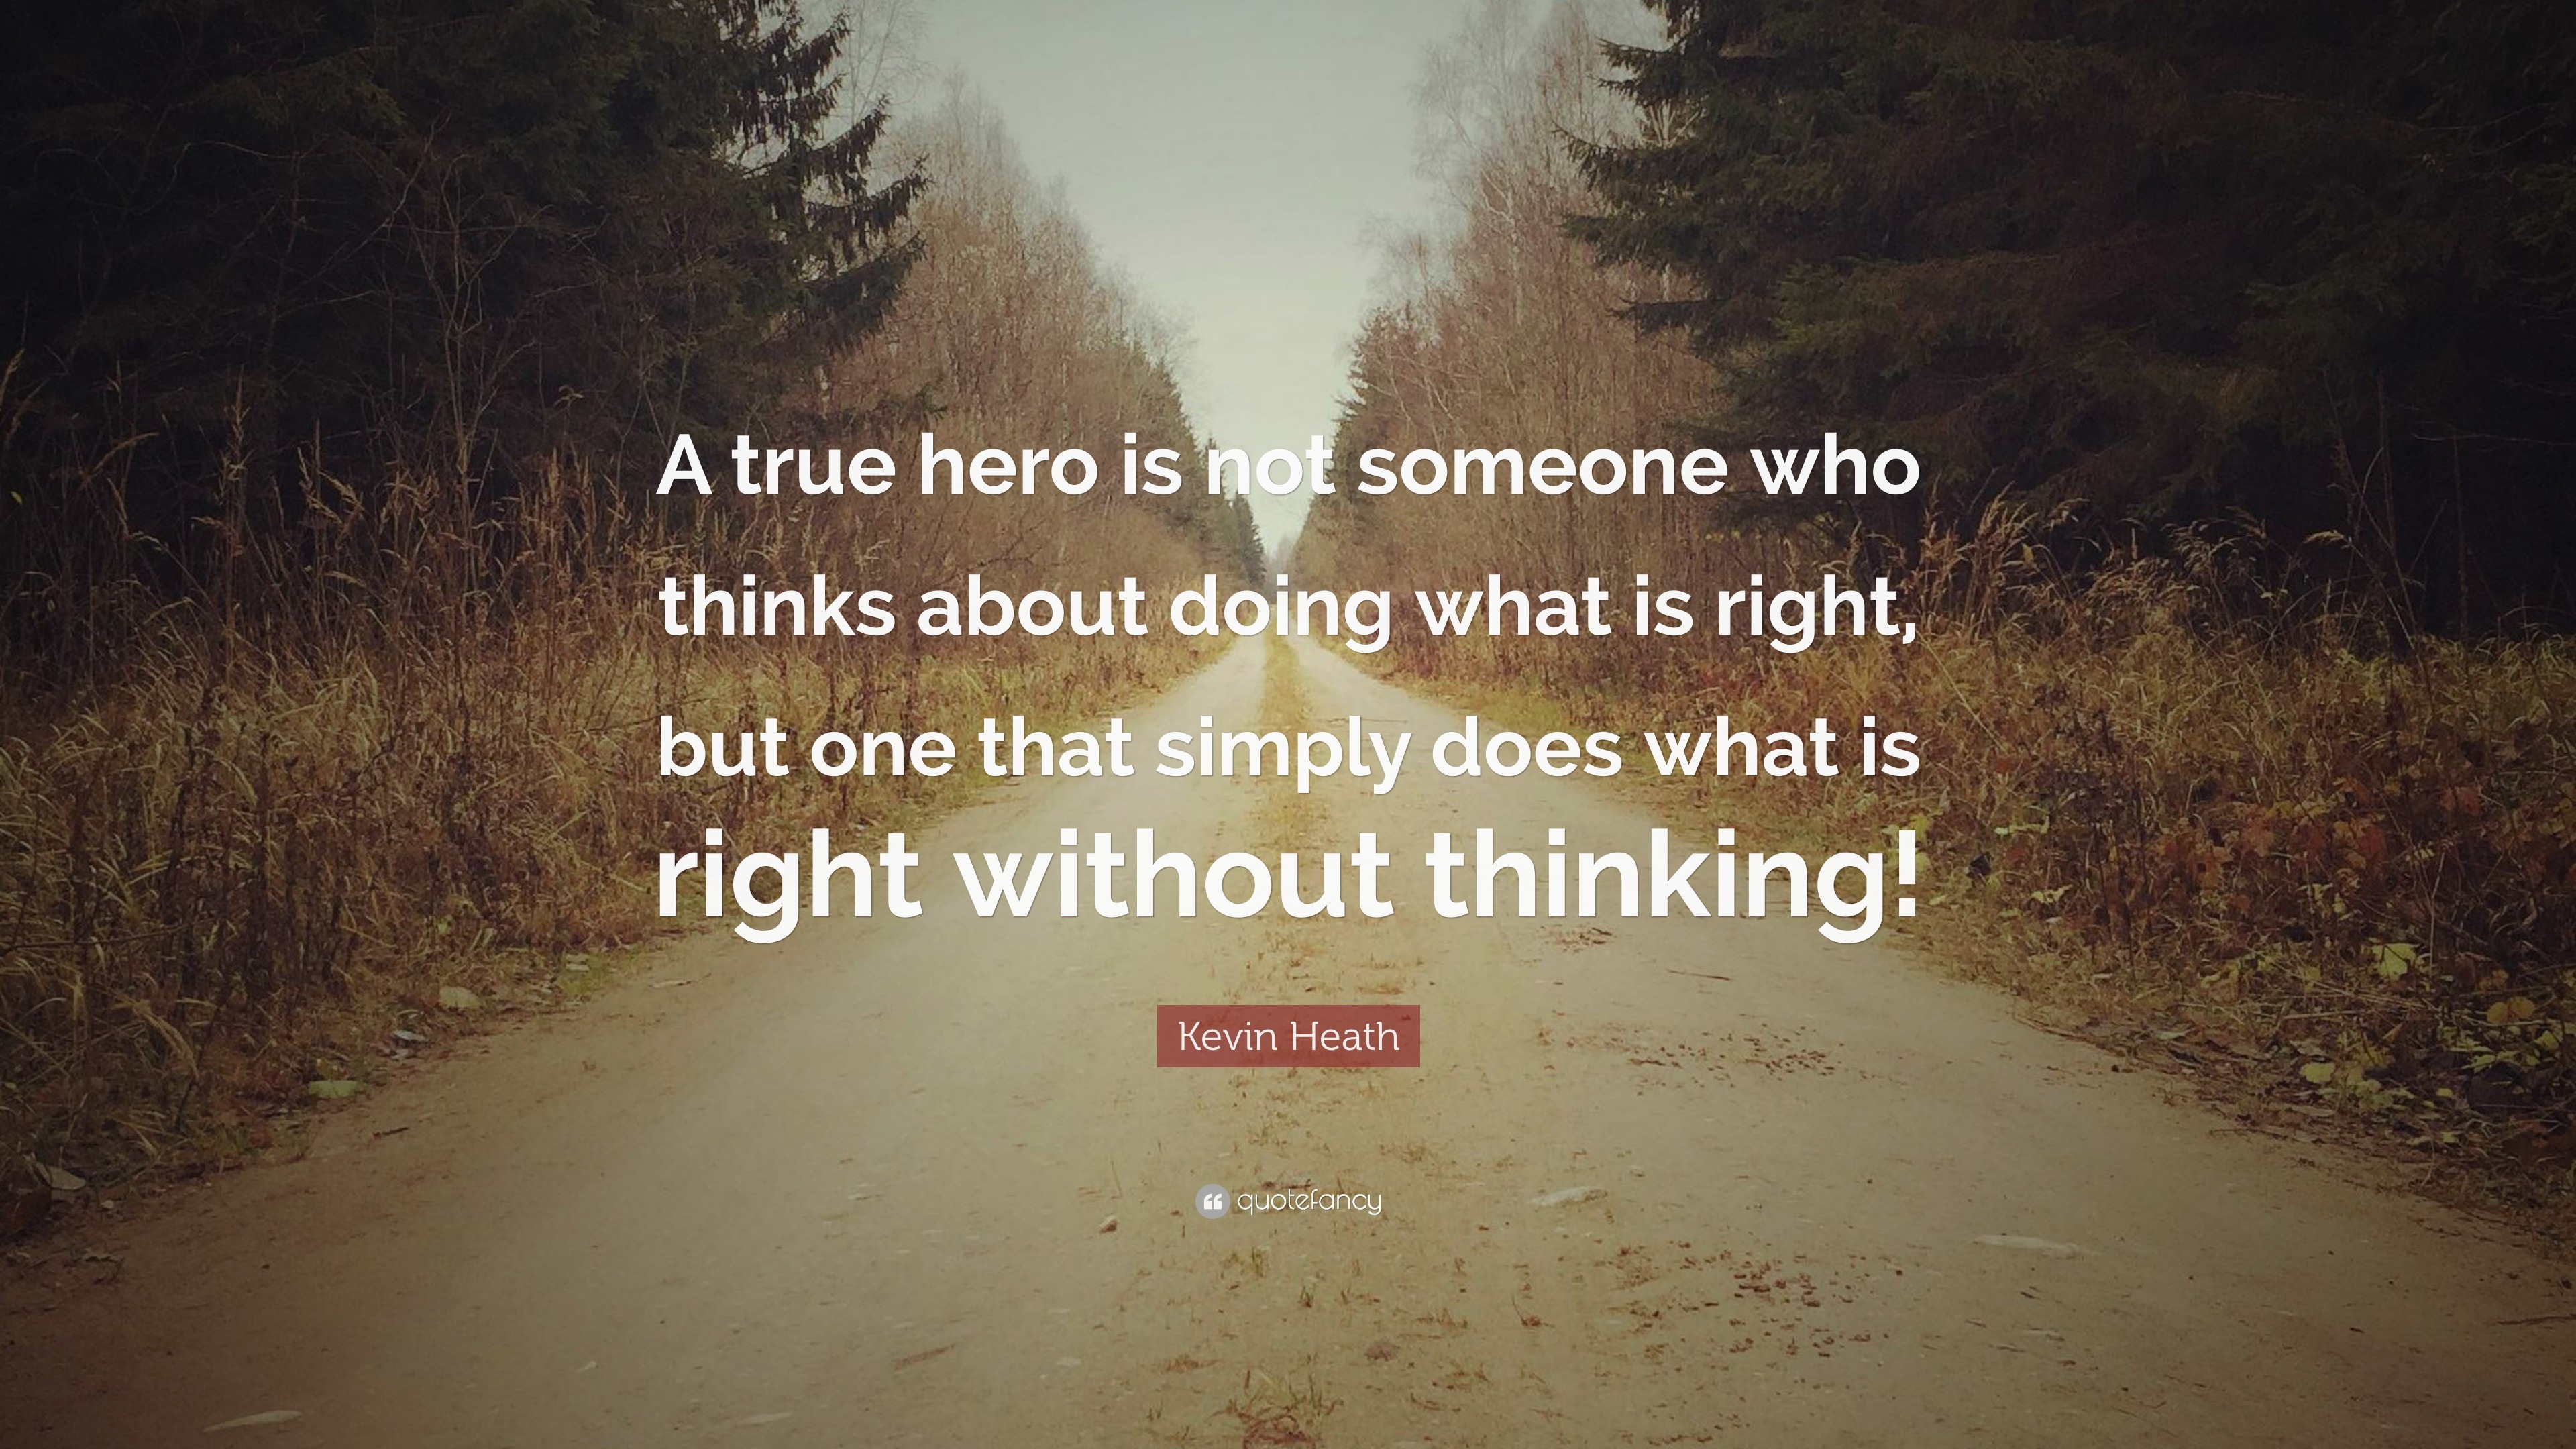 Kevin Heath Quote: “A true hero is not someone who thinks about doing ...